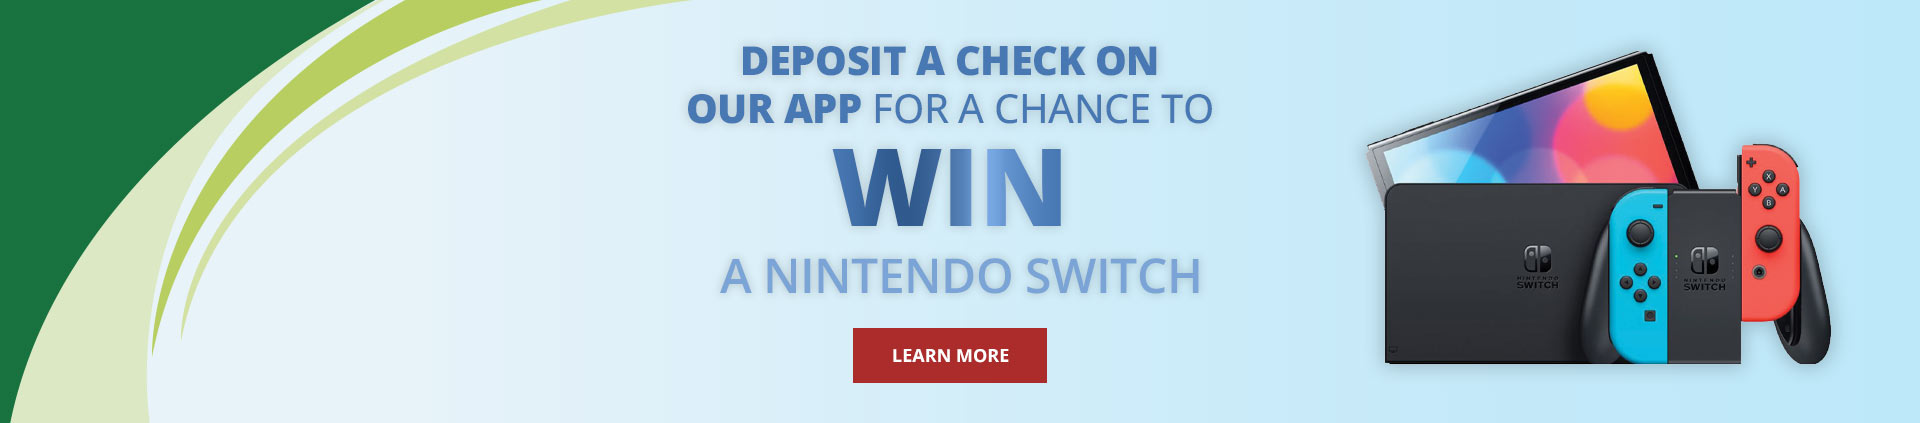 Deposit a check on our app for a chance to win a nintendo switchLearn More